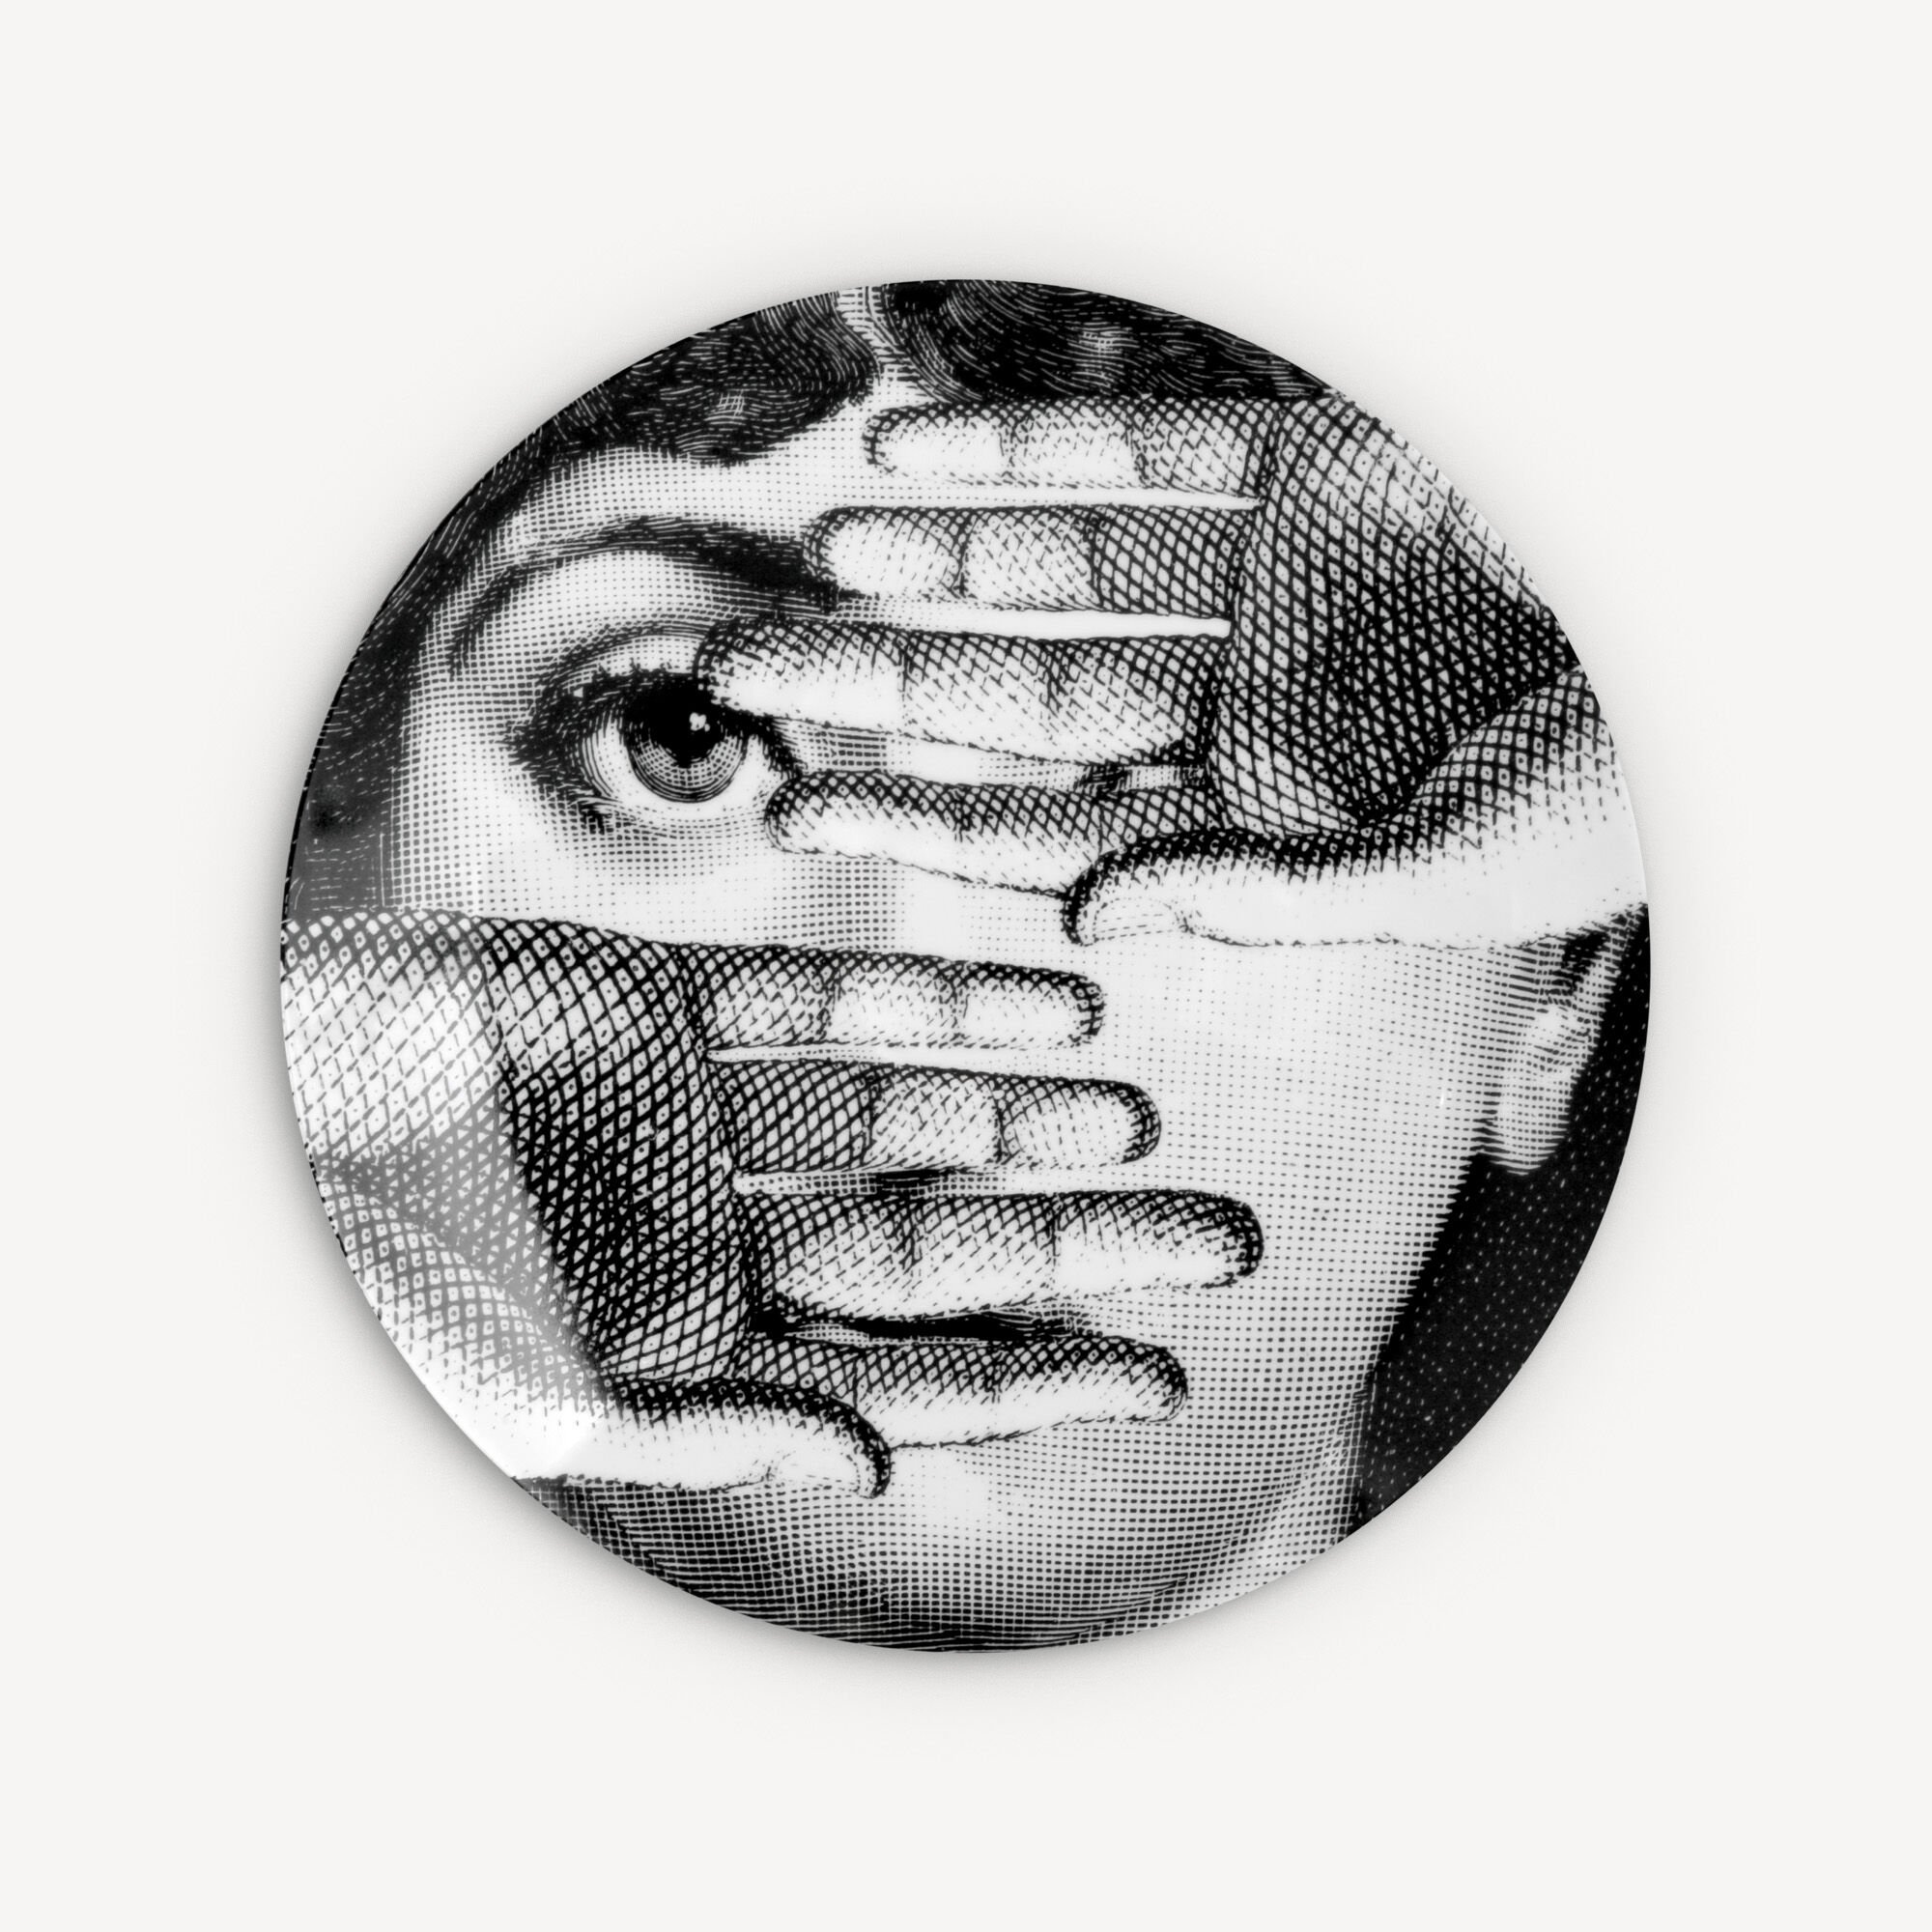 Fornasetti Tema E Variazioni N. 154 Hands Over Face Wall Plate In 